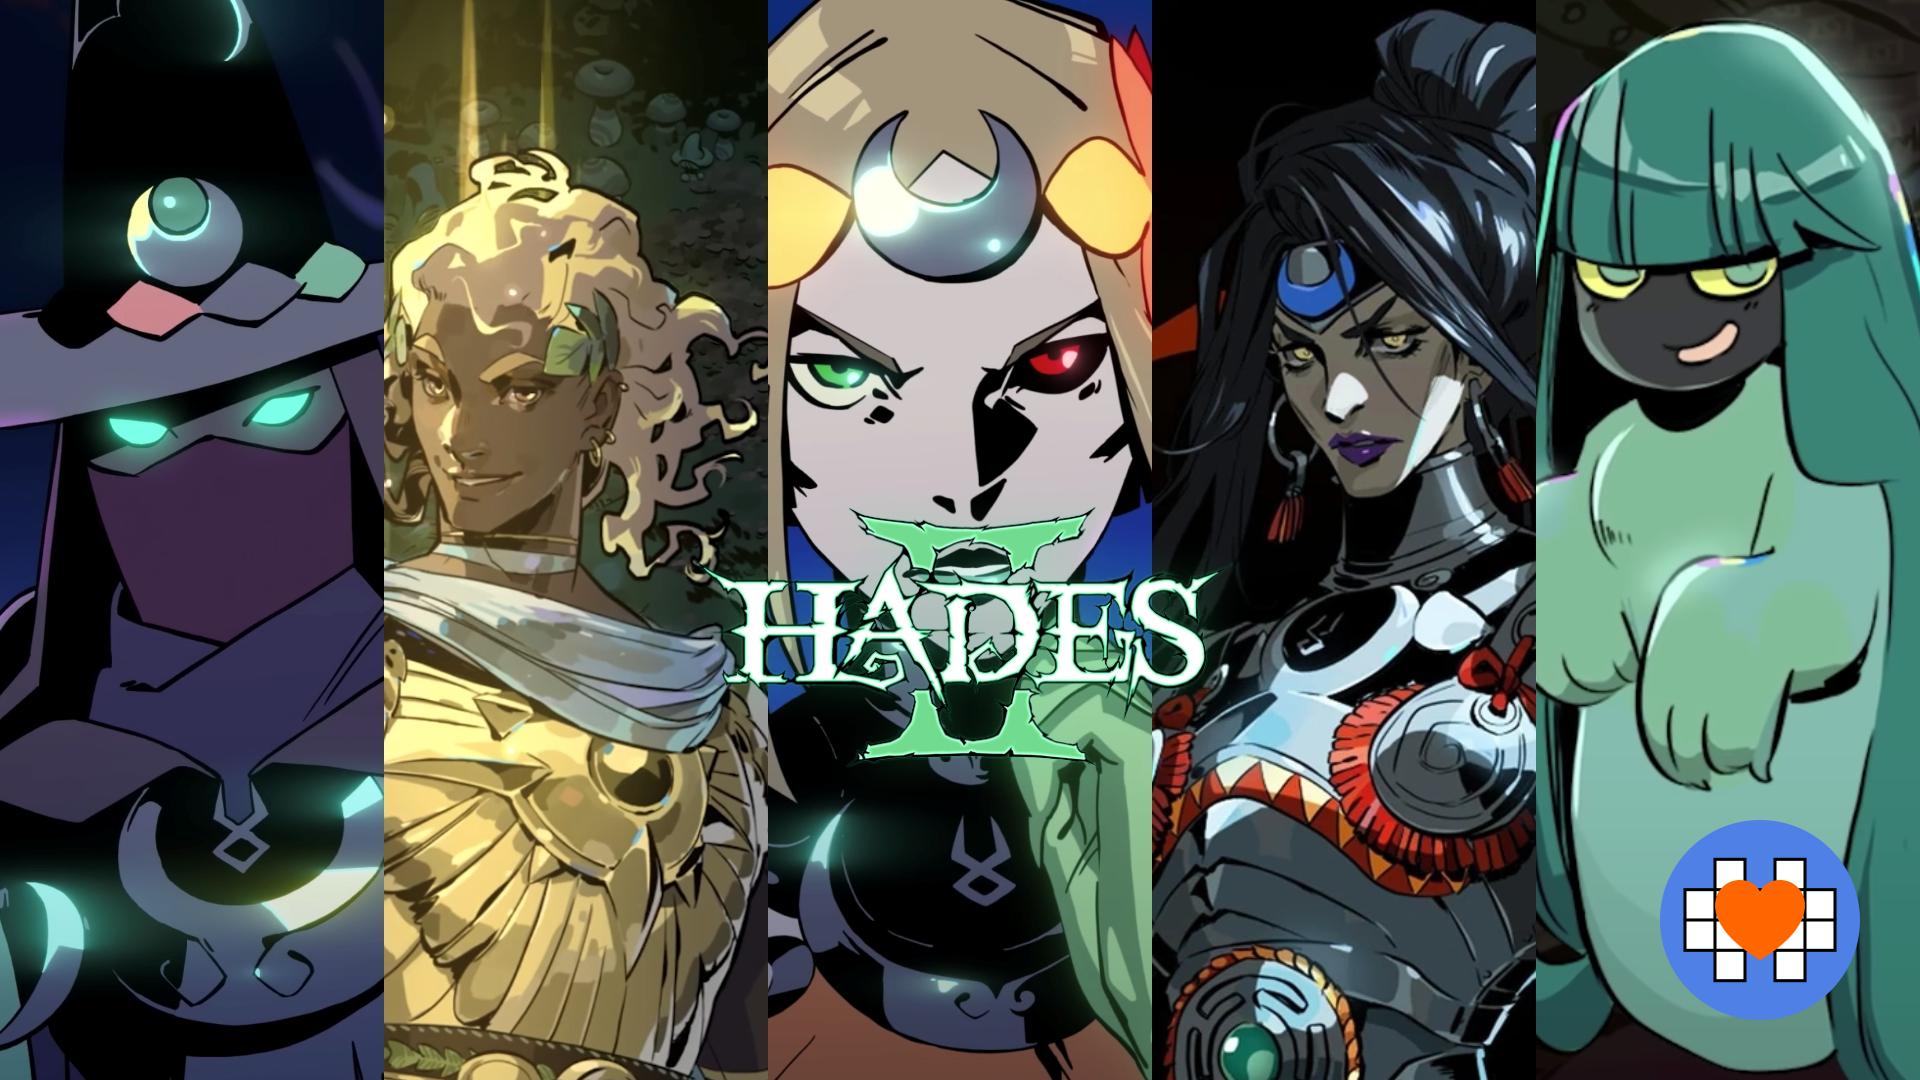 All Features Confirmed for Hades 2 So Far